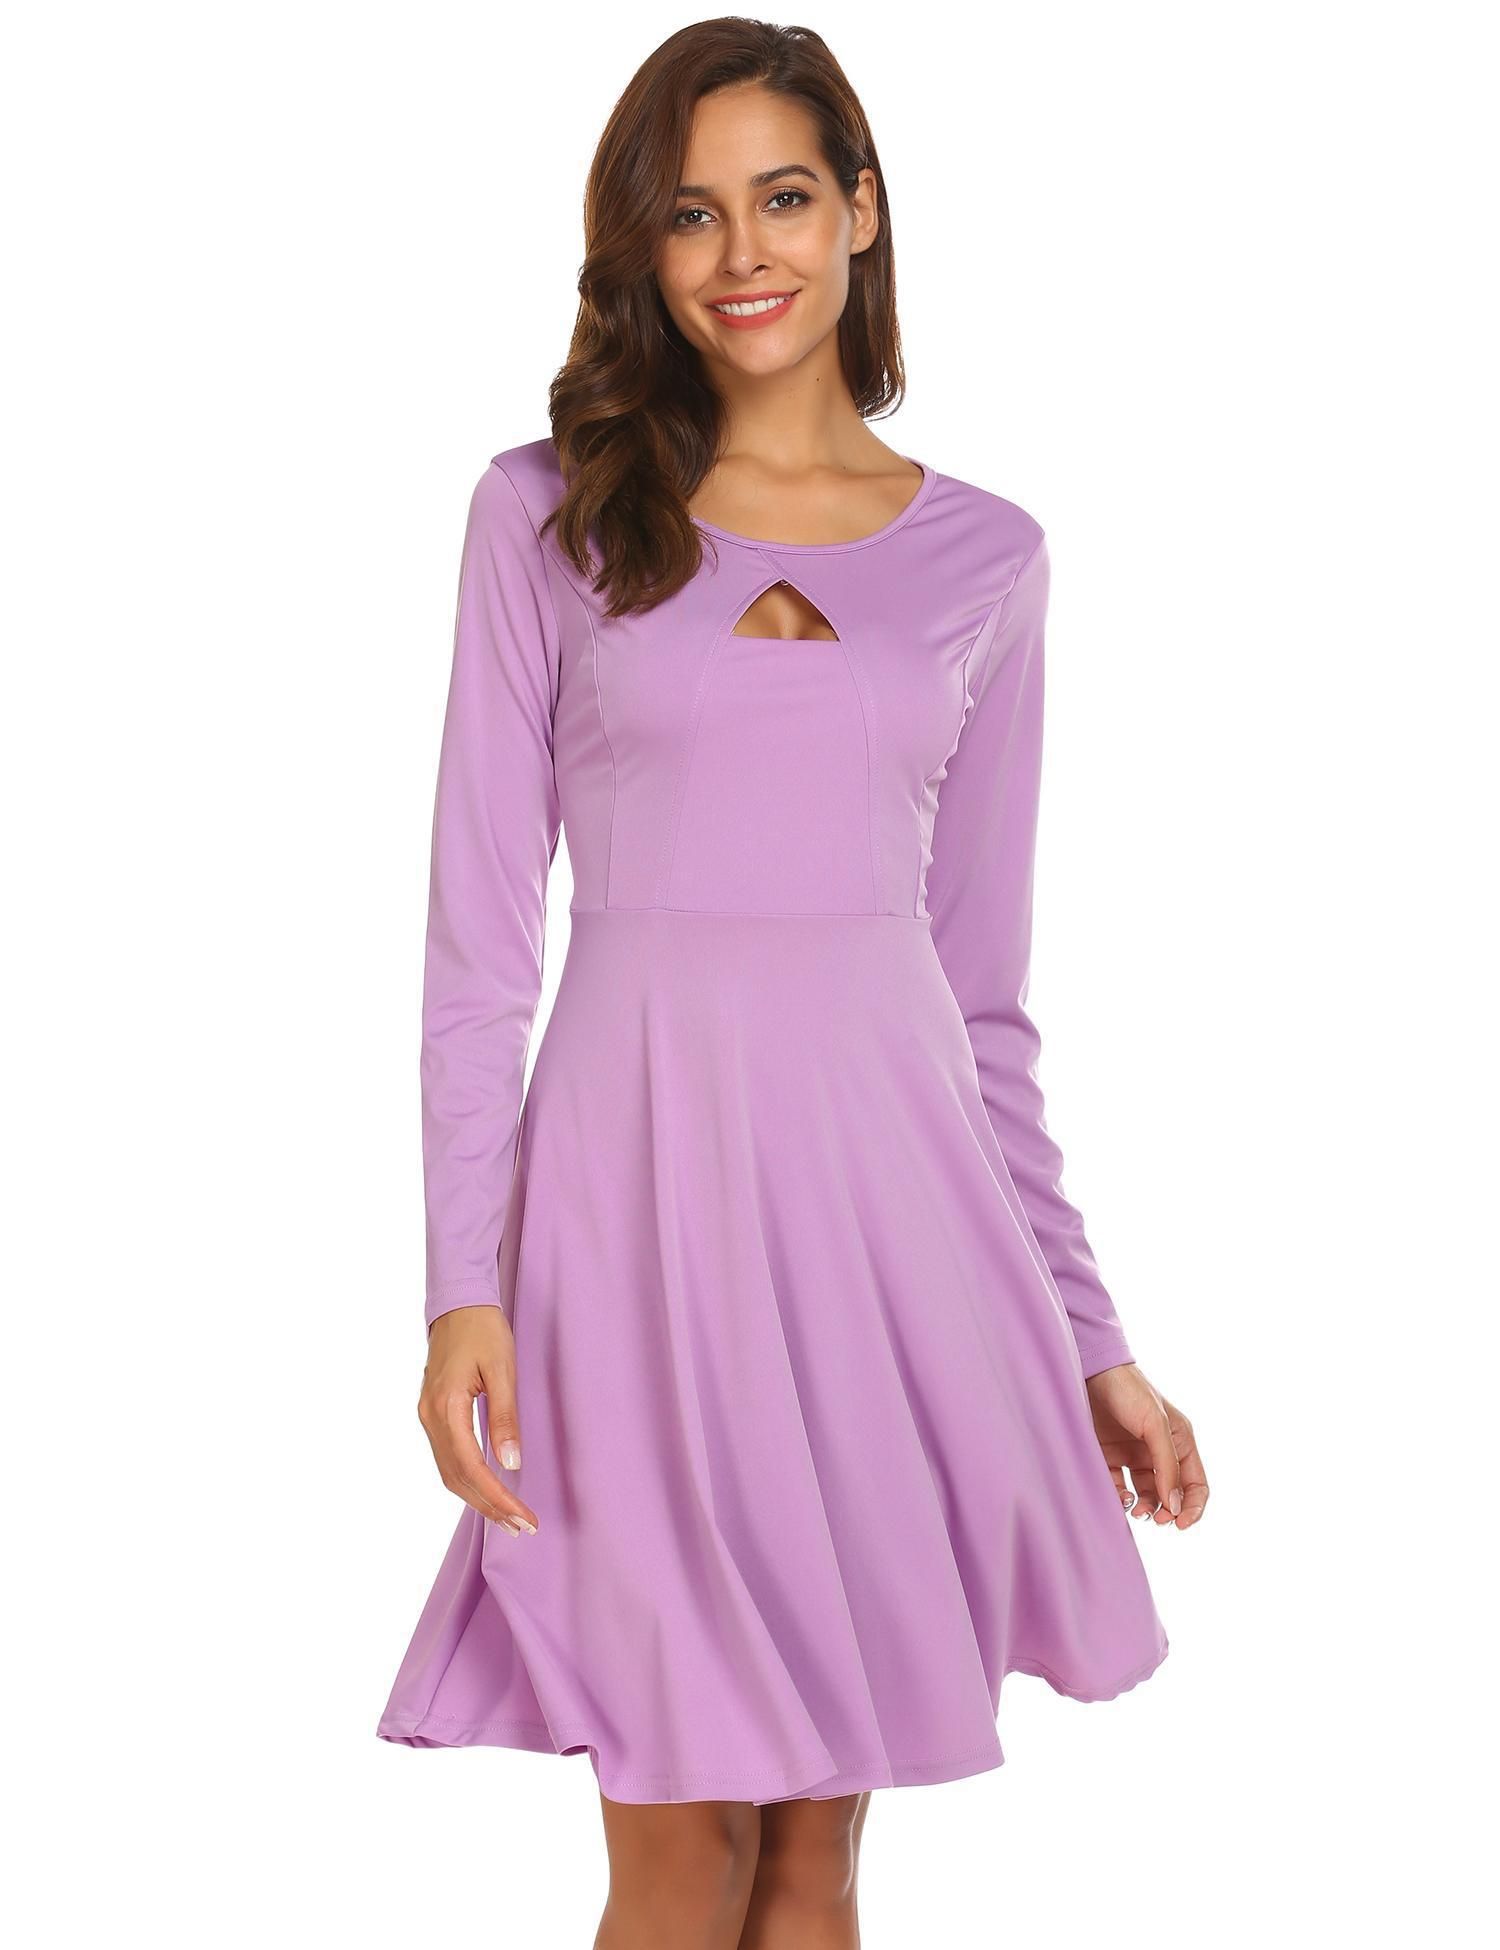 long sleeve casual dresses for women